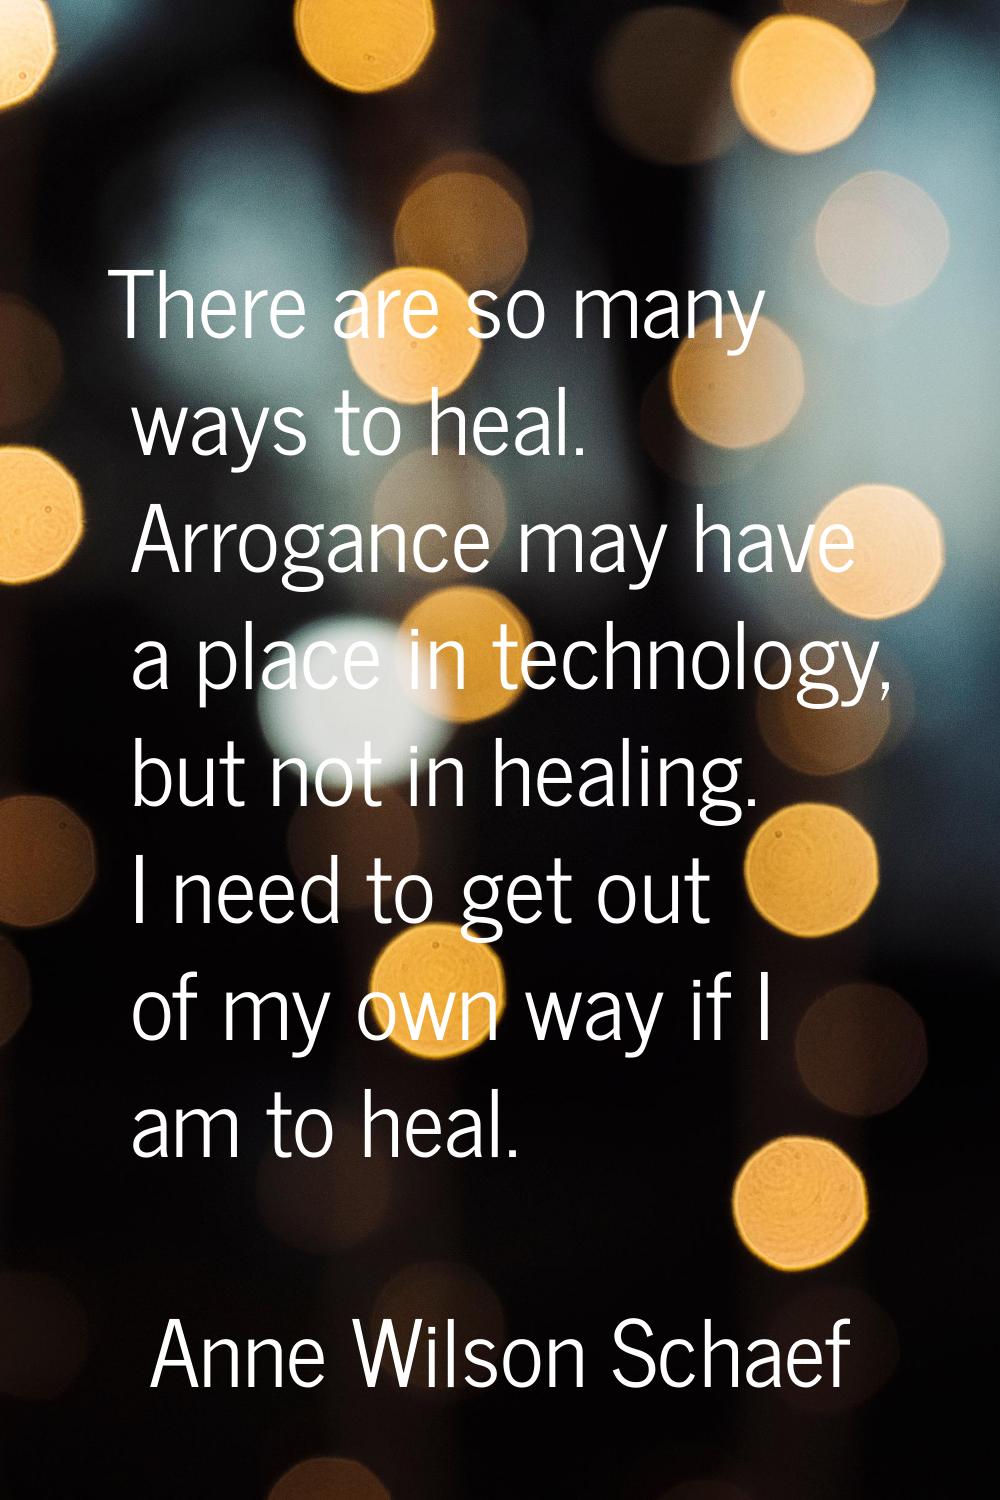 There are so many ways to heal. Arrogance may have a place in technology, but not in healing. I nee